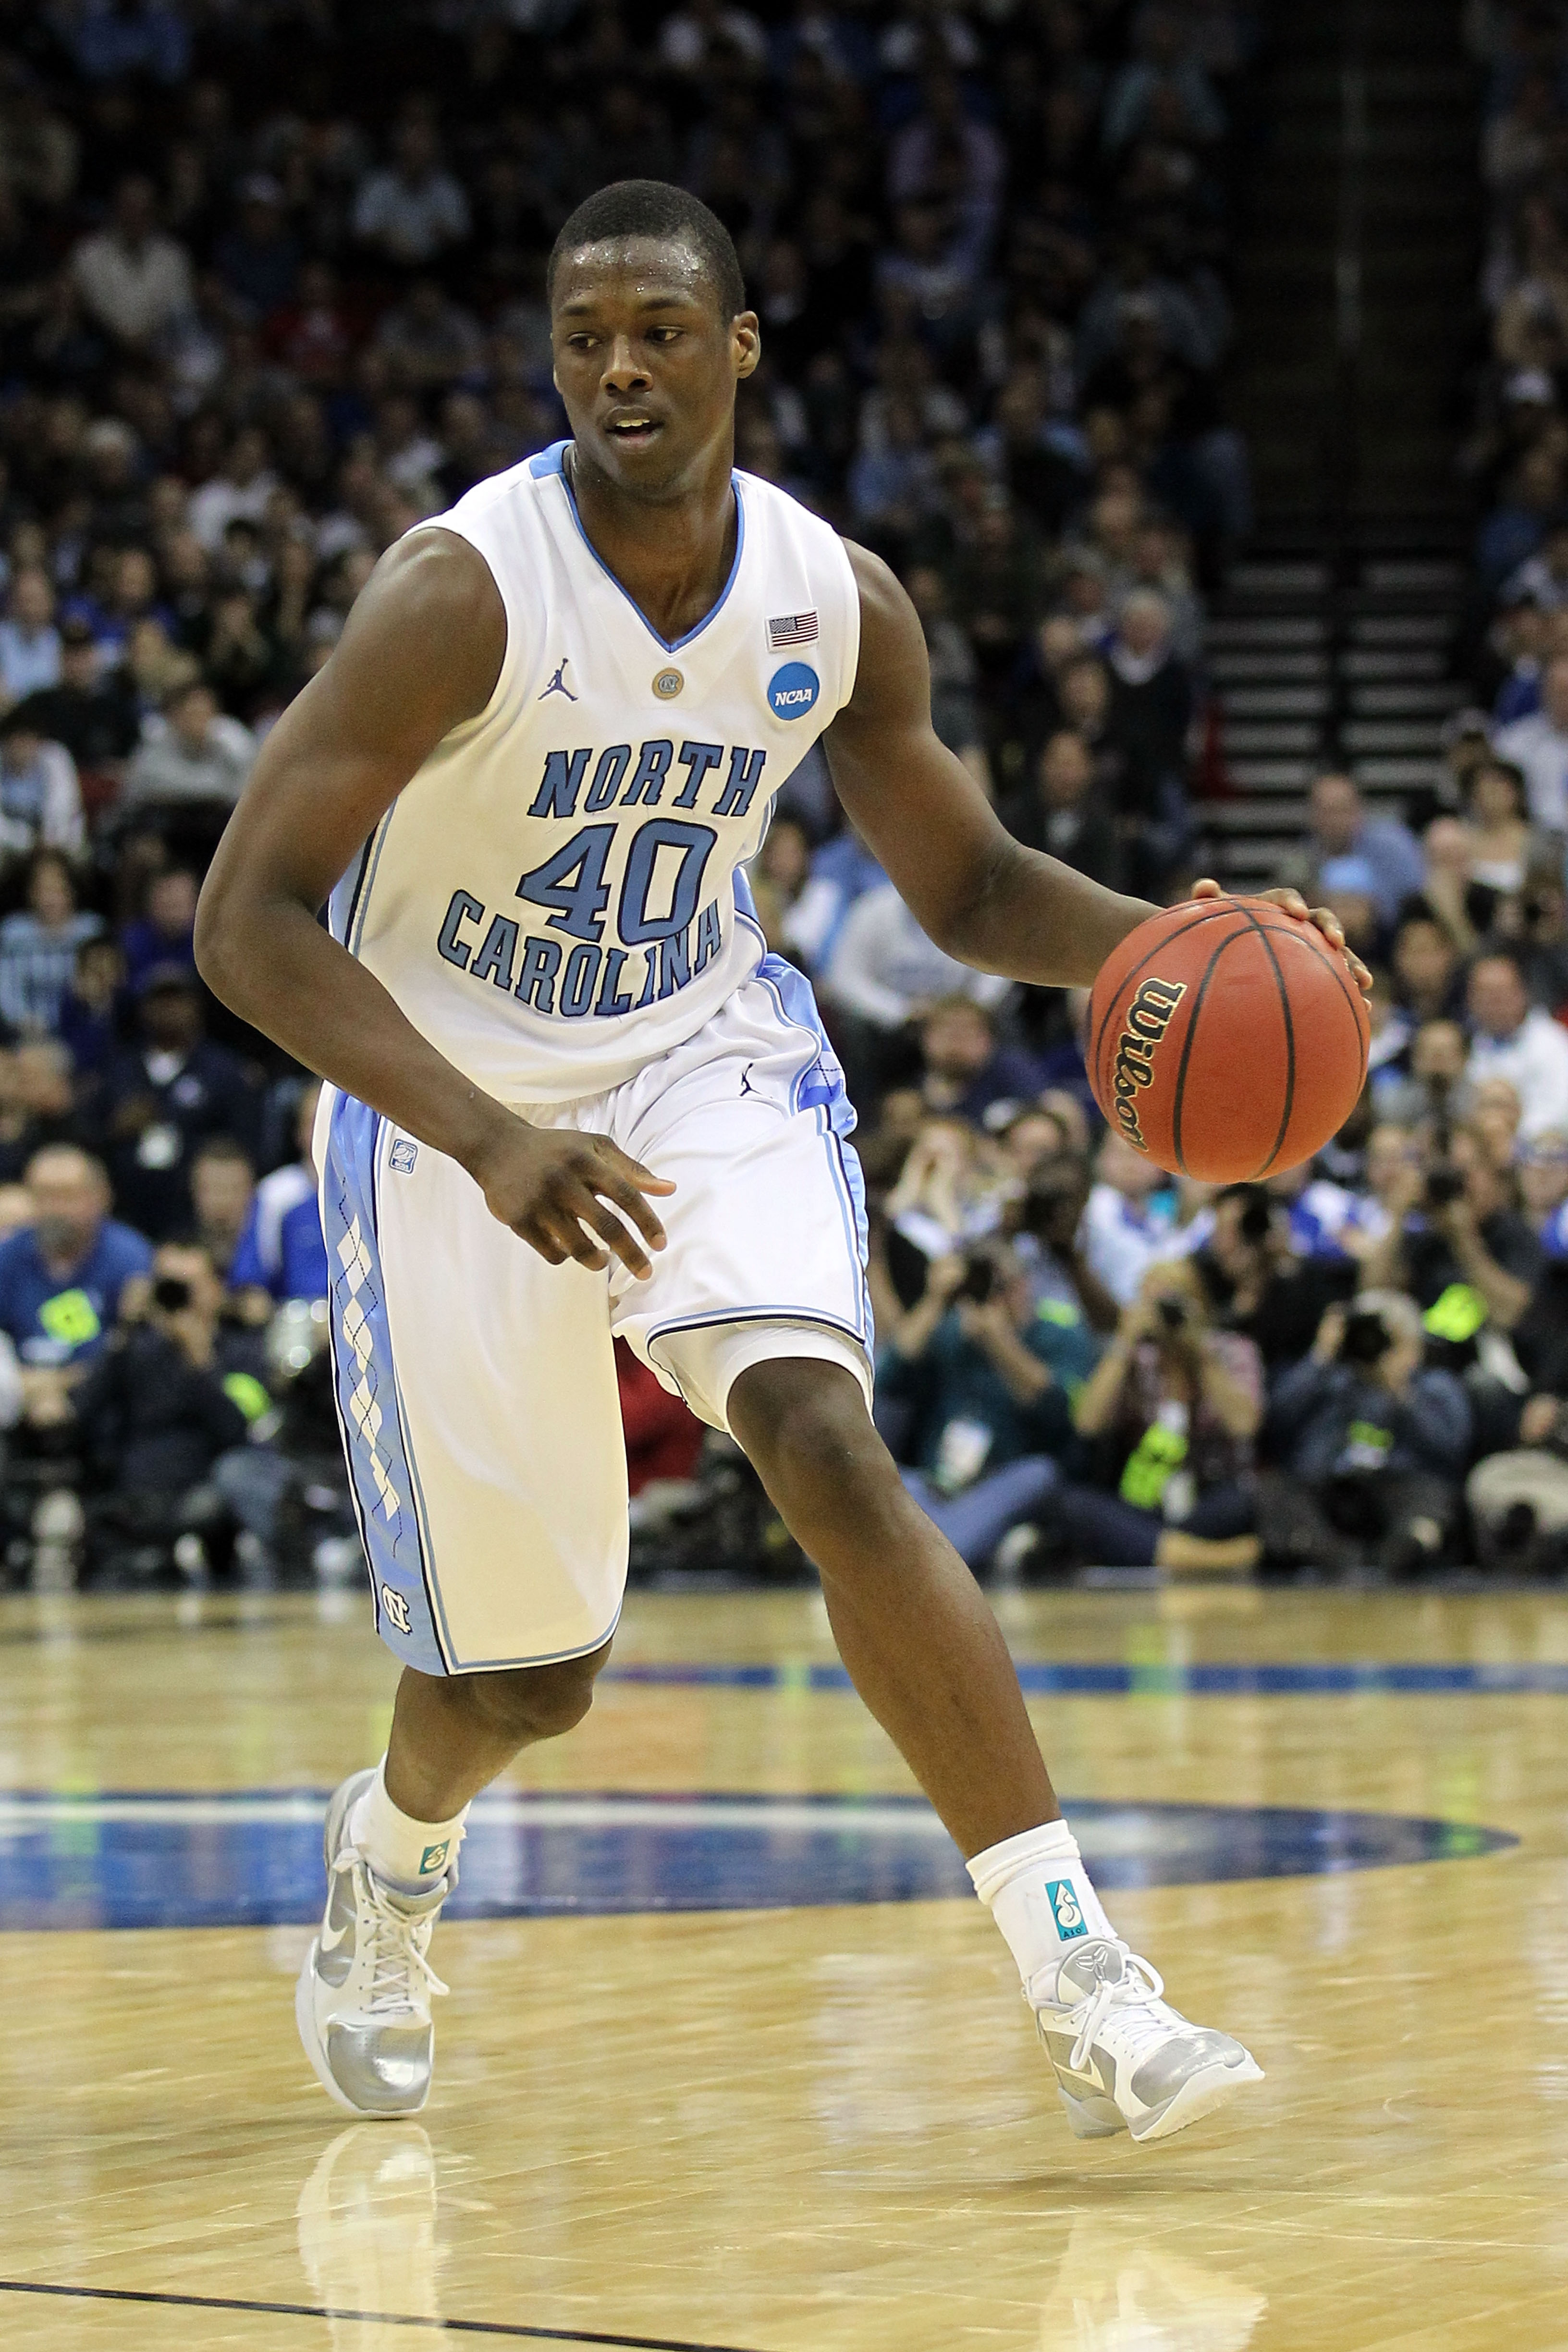 NEWARK, NJ - MARCH 27:  Harrison Barnes #40 of the North Carolina Tar Heels dribbles the ball during the second half of the game against the Kentucky Wildcats in the east regional final of the 2011 NCAA men's basketball tournament at Prudential Center on